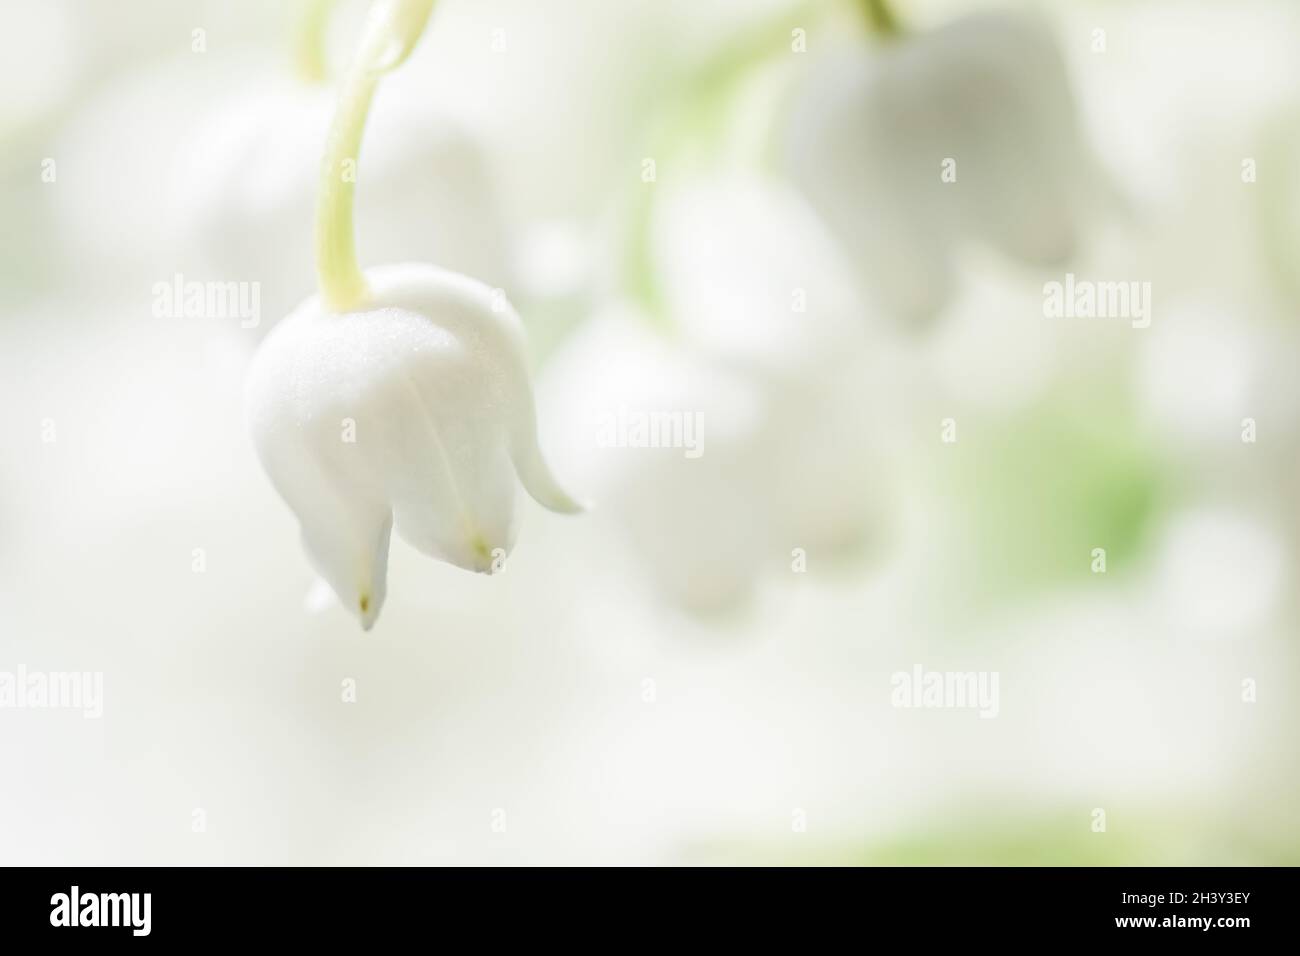 Blooming lily of the valley flowers. Natural floral background Stock Photo